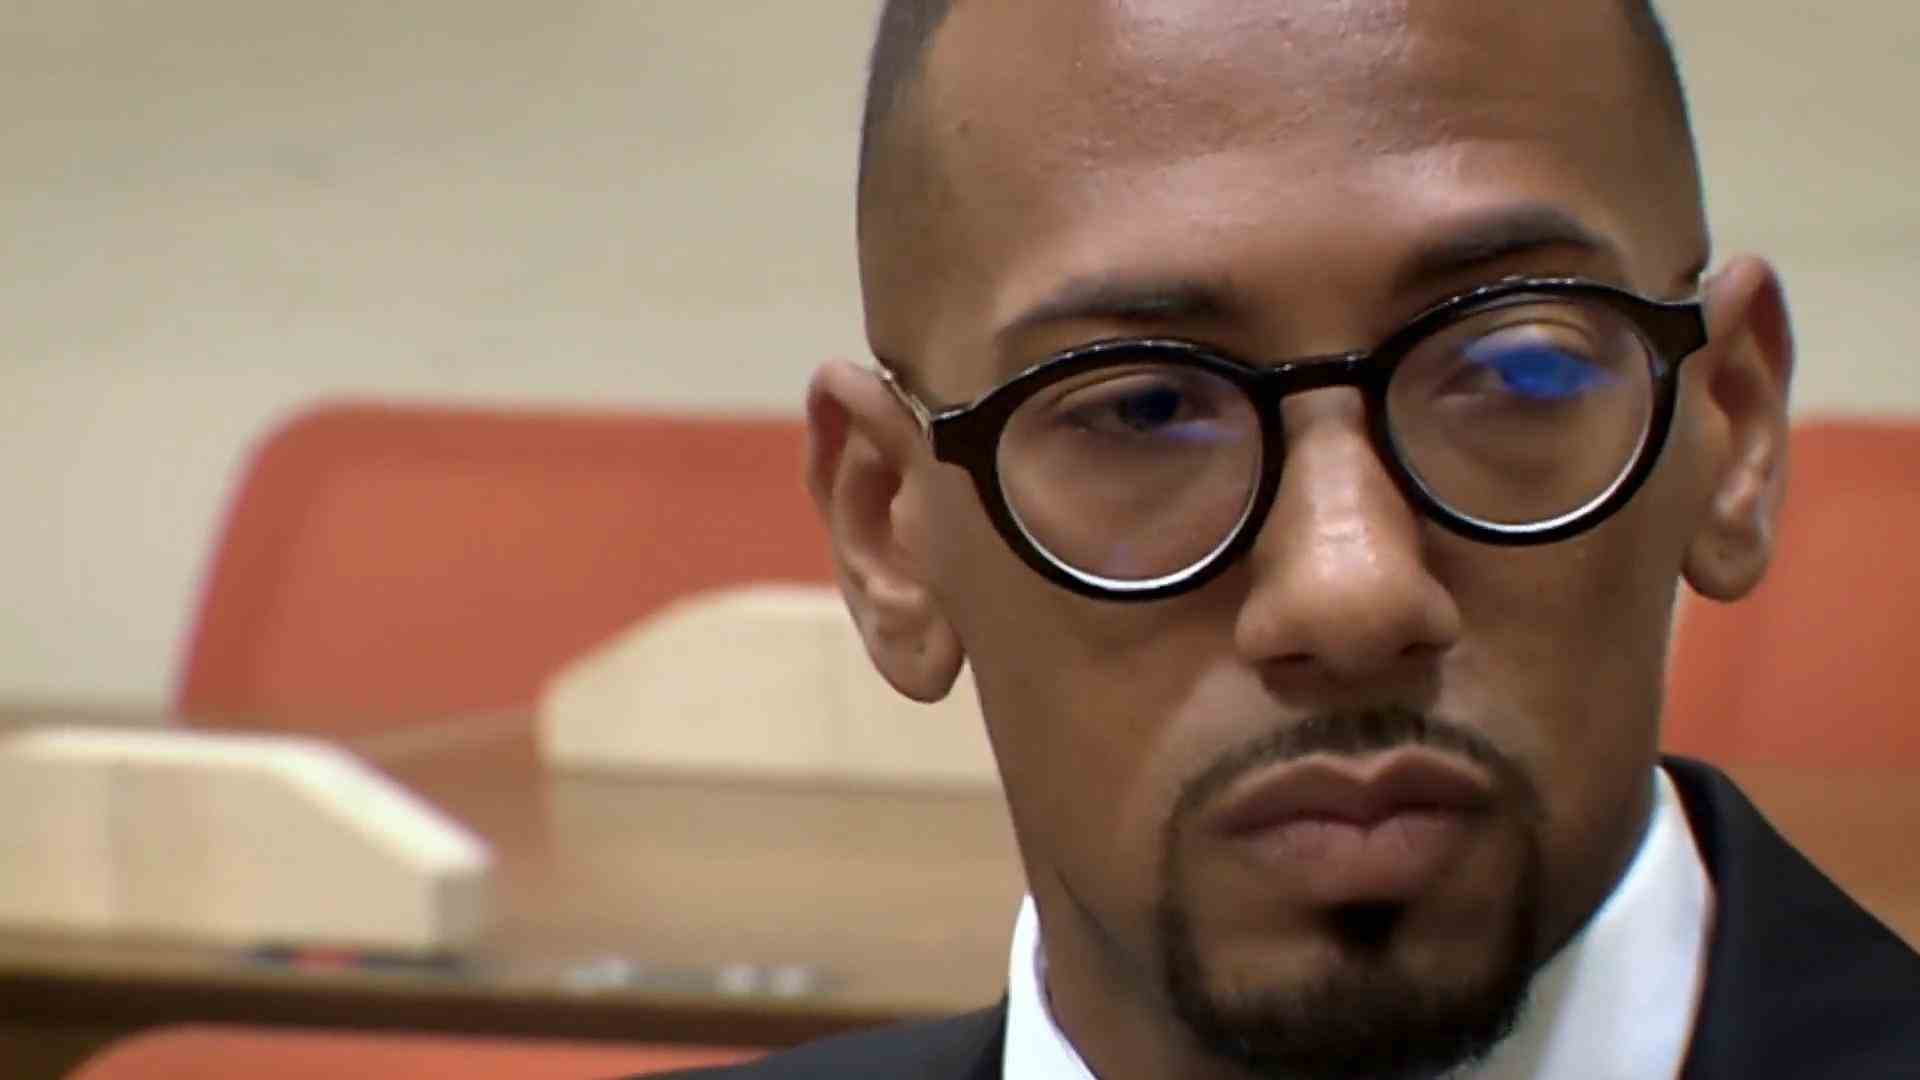 Jerome Boateng continues to defend himself for assault